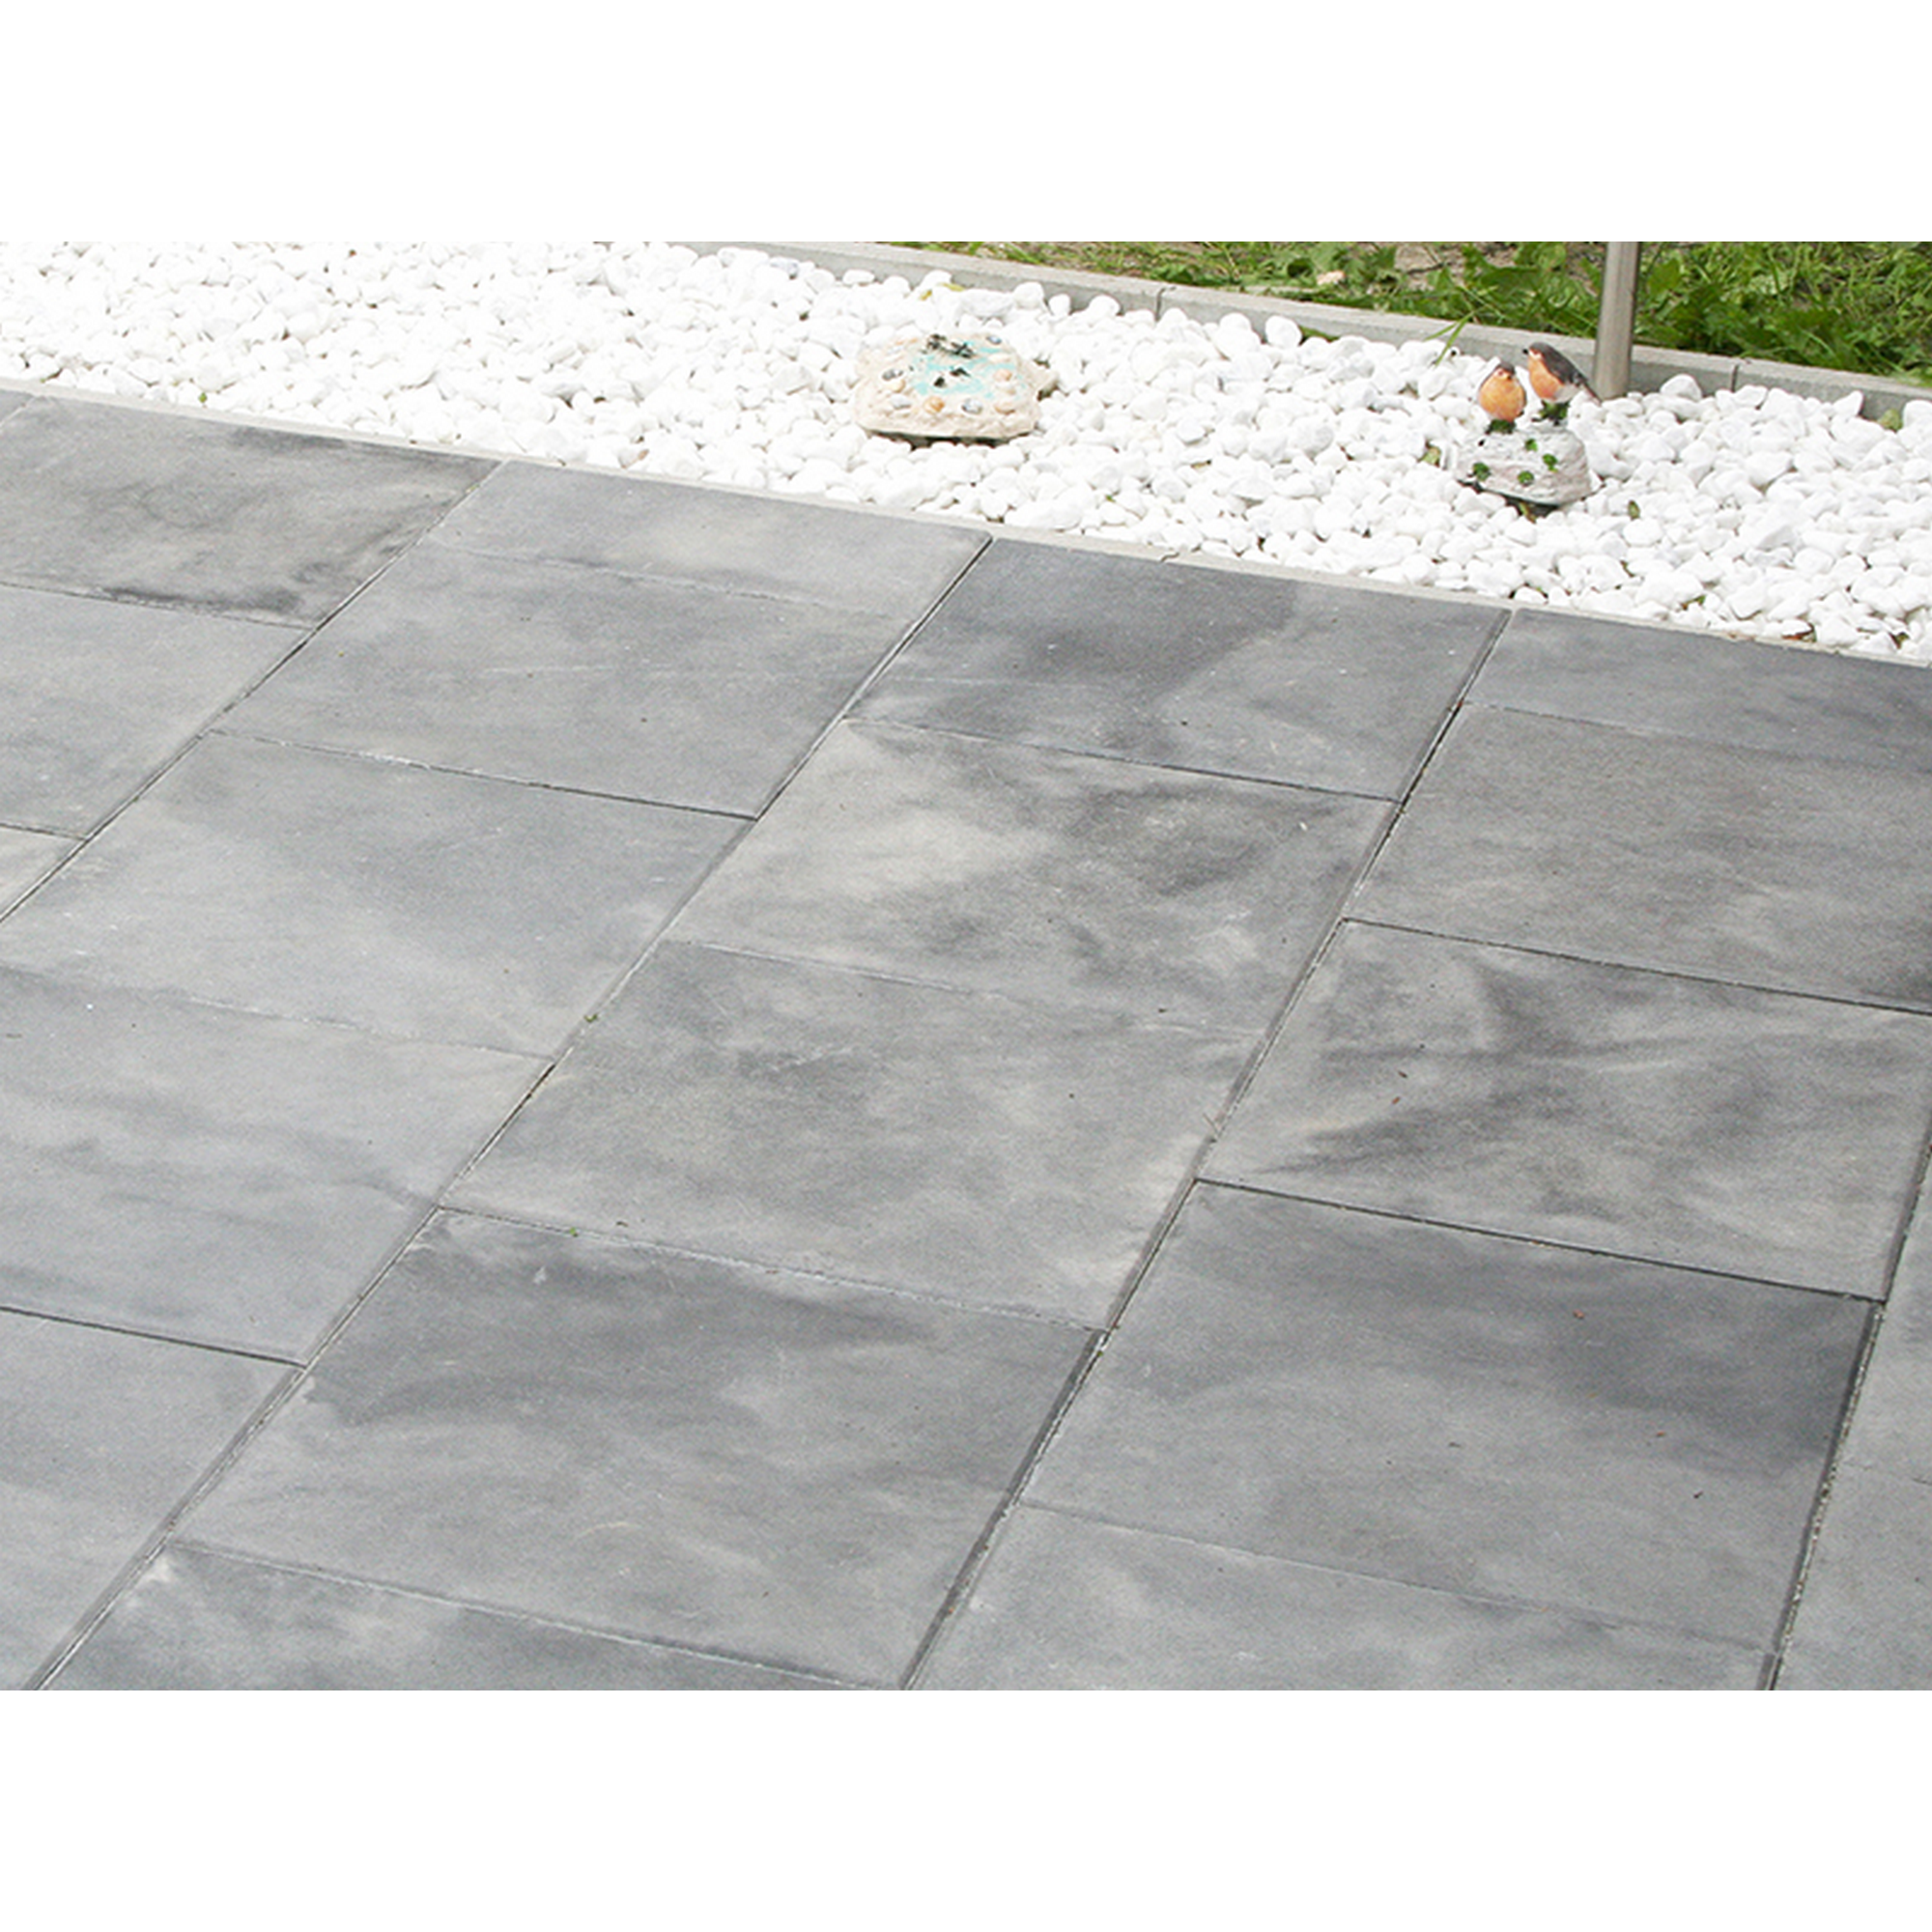 T-Court 'Protect' Beton grauschwarz 40 x 40 x 4 cm + product picture